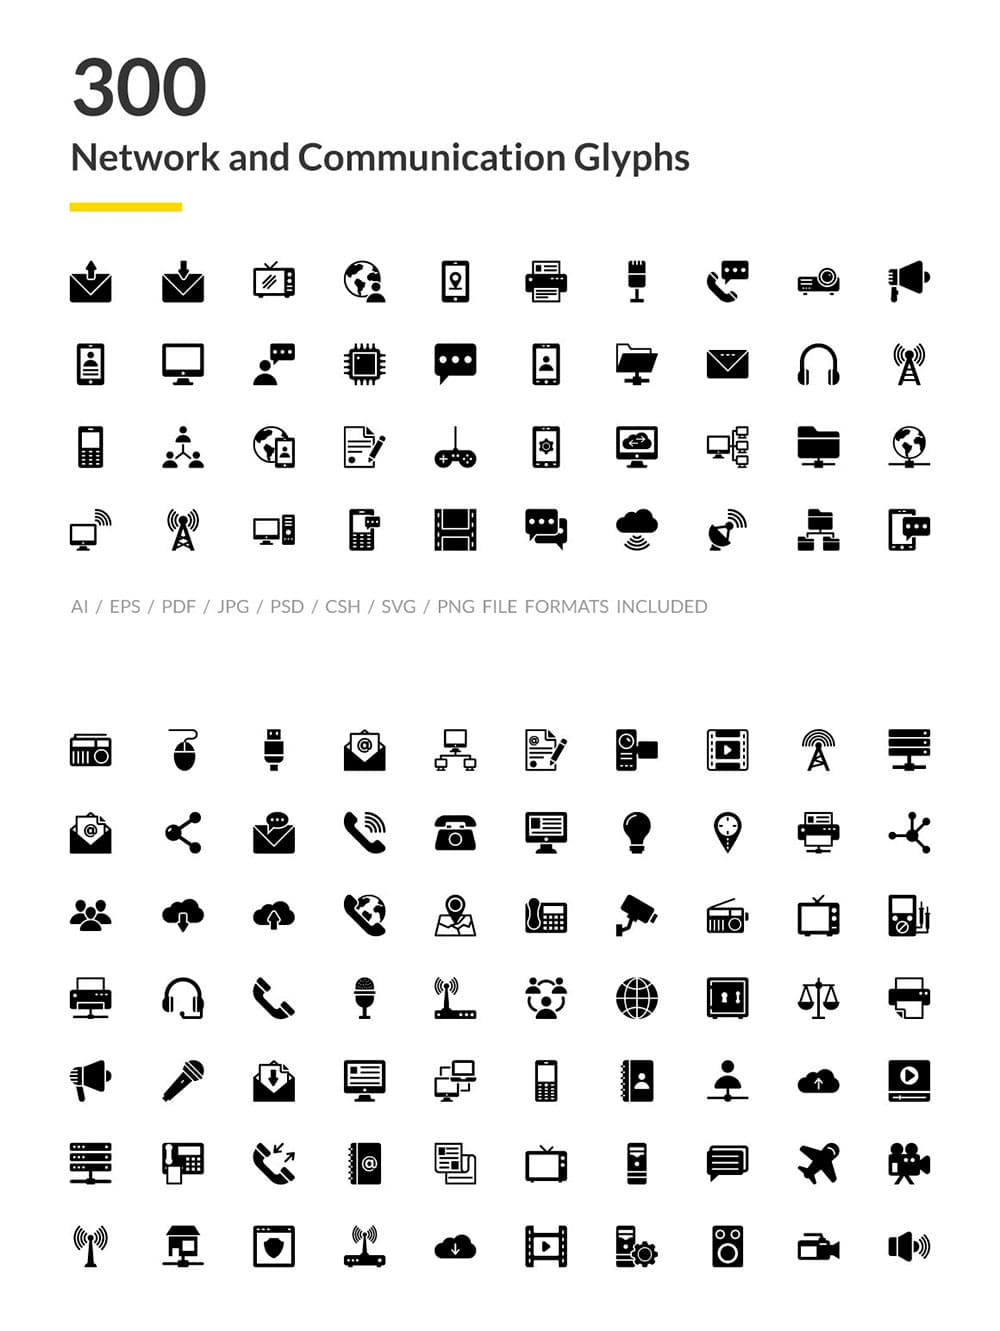 300 network and communications icons, picture for pinterest.